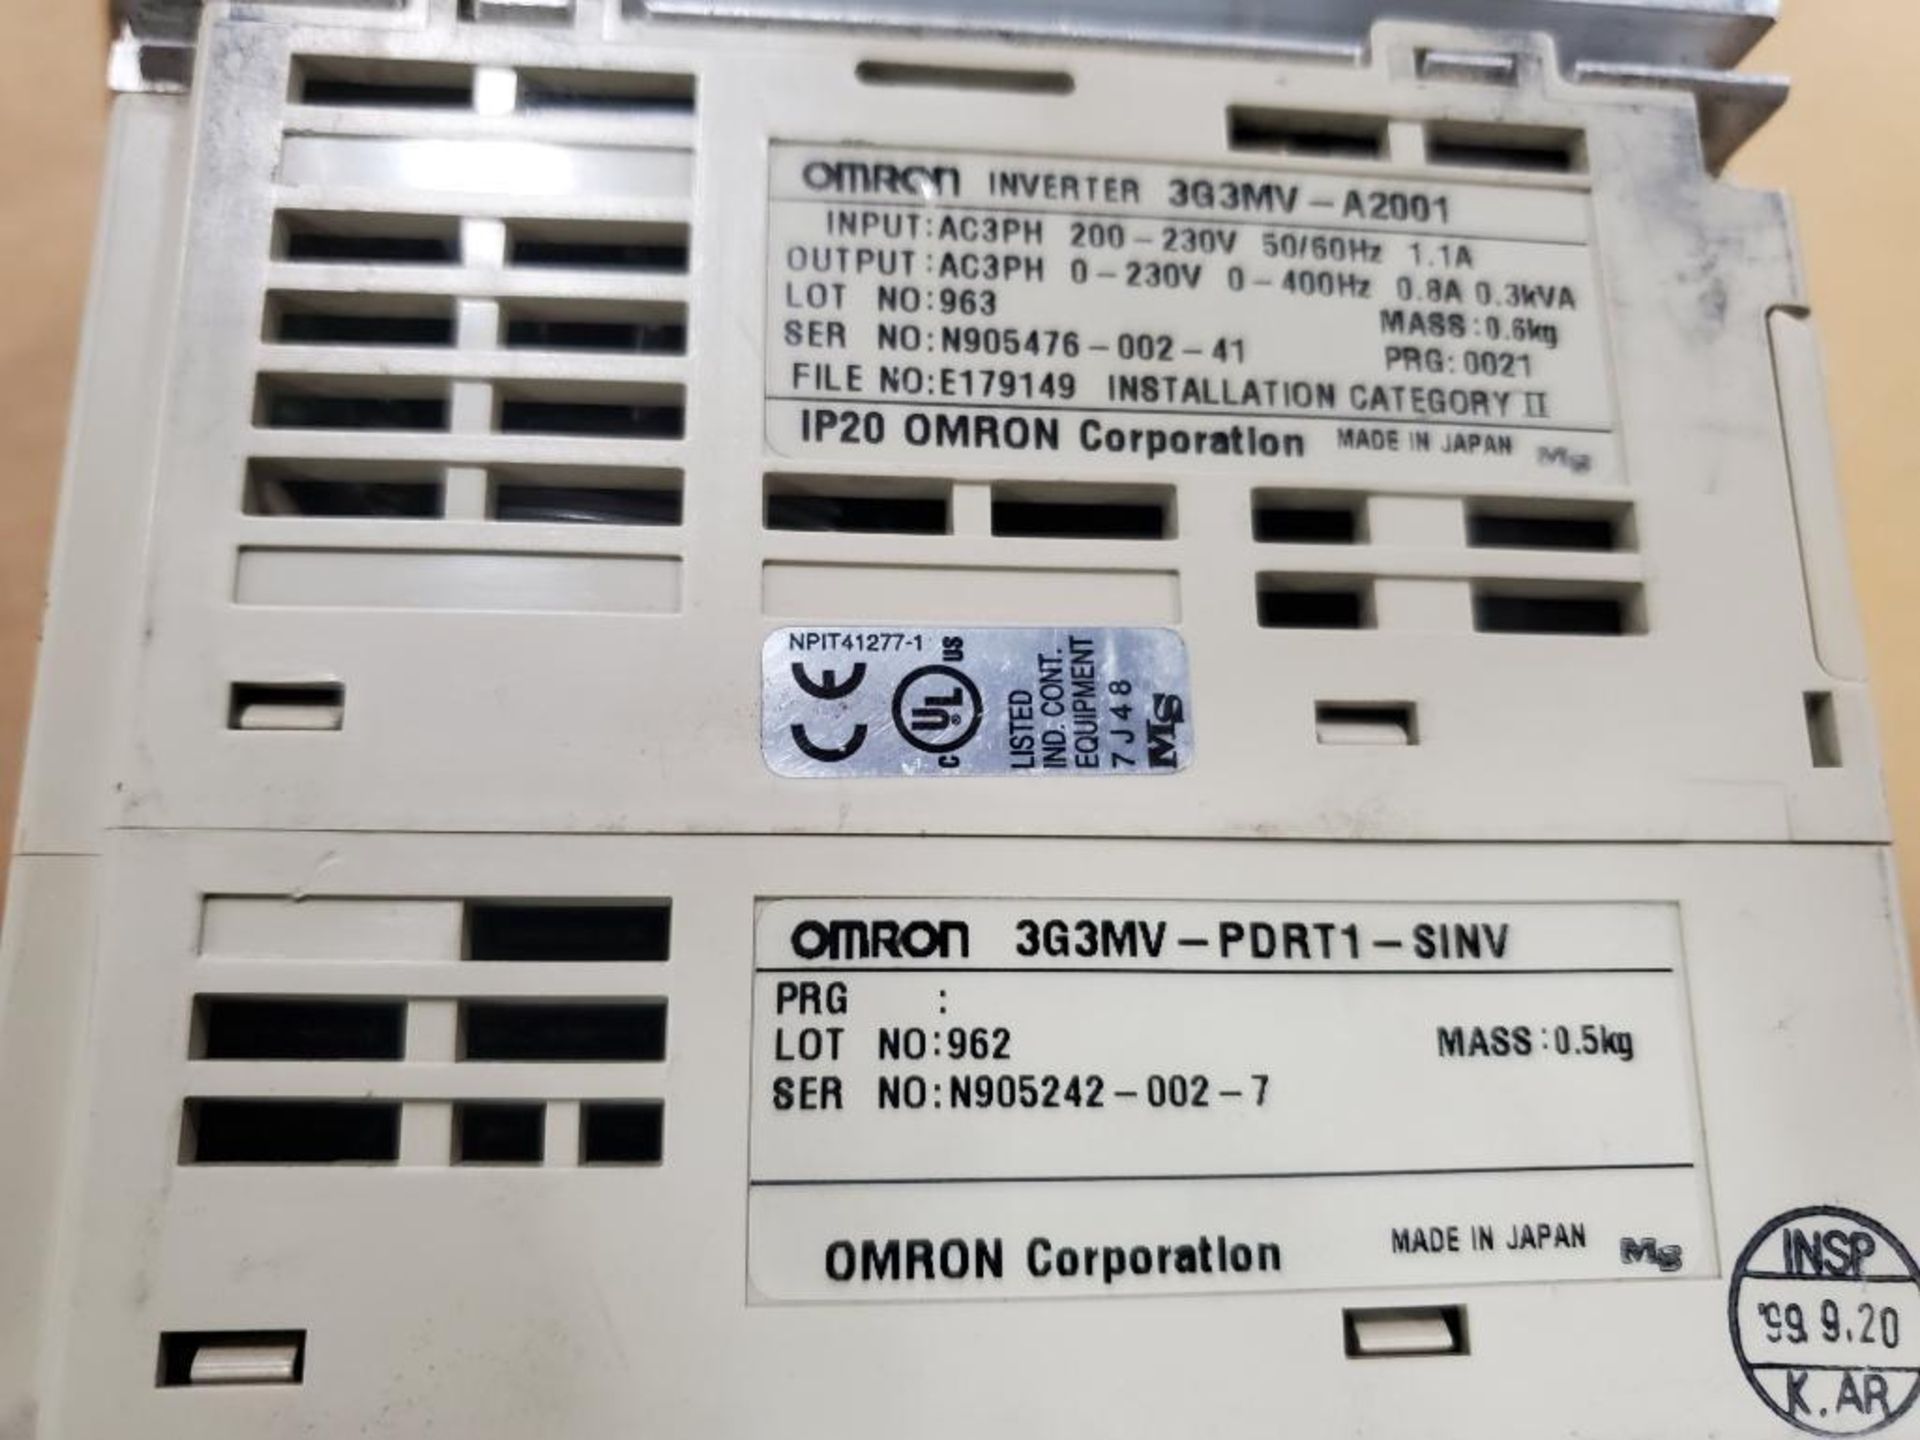 Qty 2 - Assorted Omron SYSDRIVE 3G3MV inverter drive. - Image 4 of 6